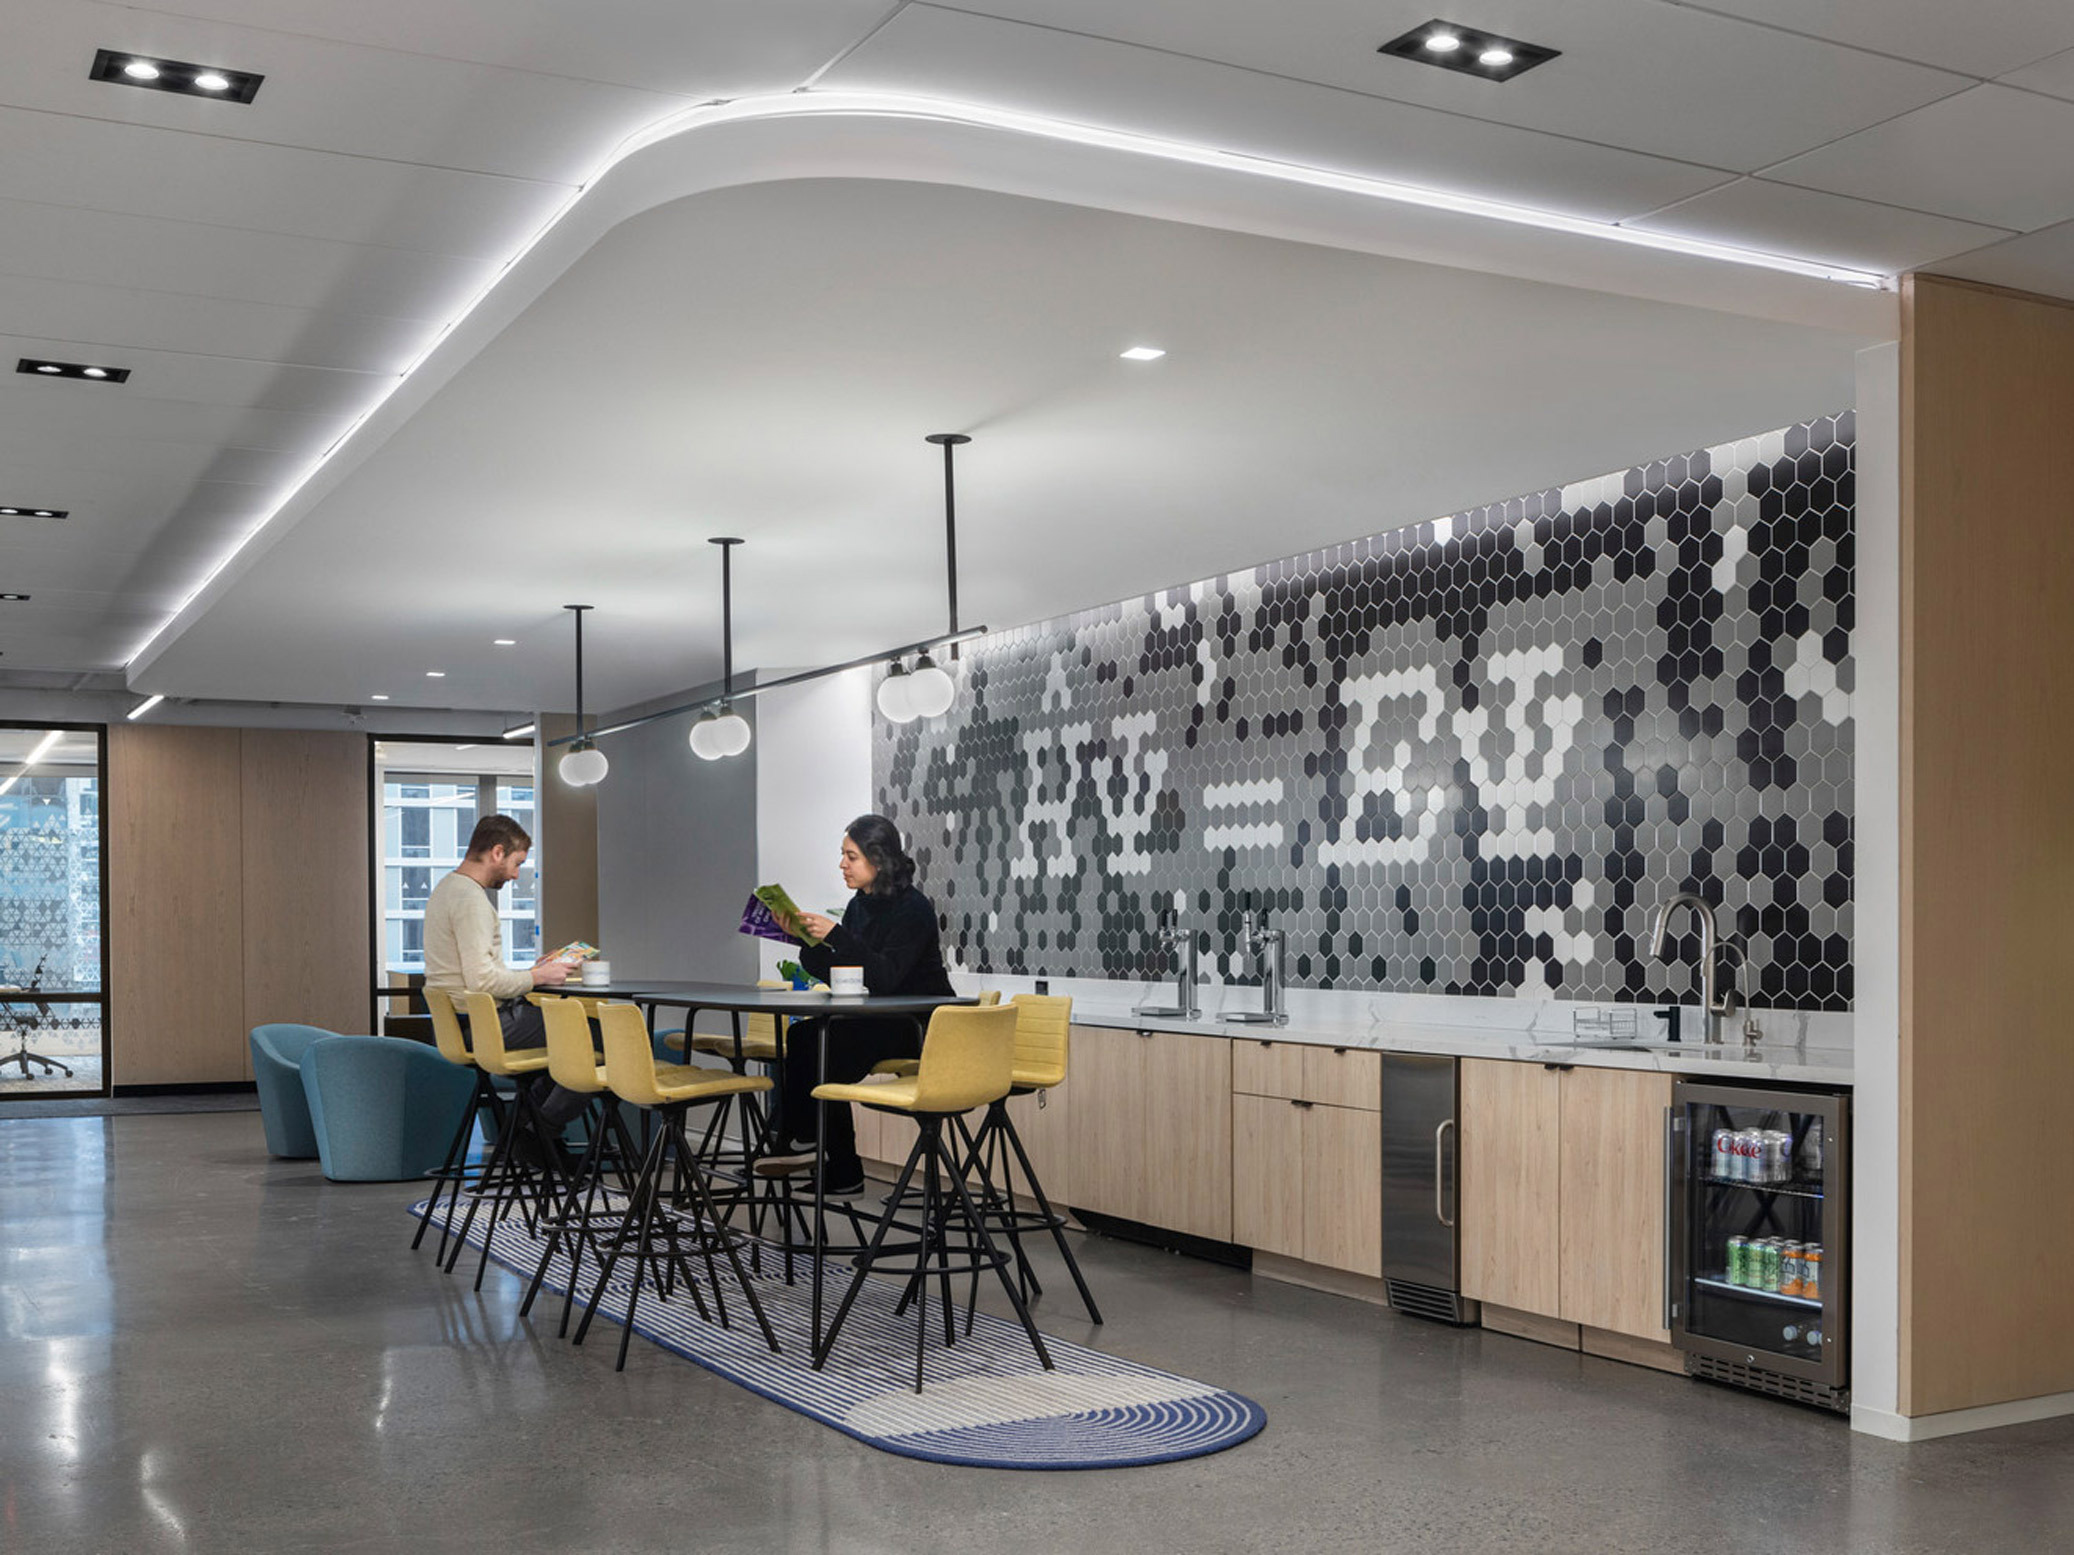 Modern office break room featuring geometric hexagonal tile backsplash, integrated LED lighting in the ceiling, and contemporary furniture with a color palette of blues, yellows, and neutral wood tones.